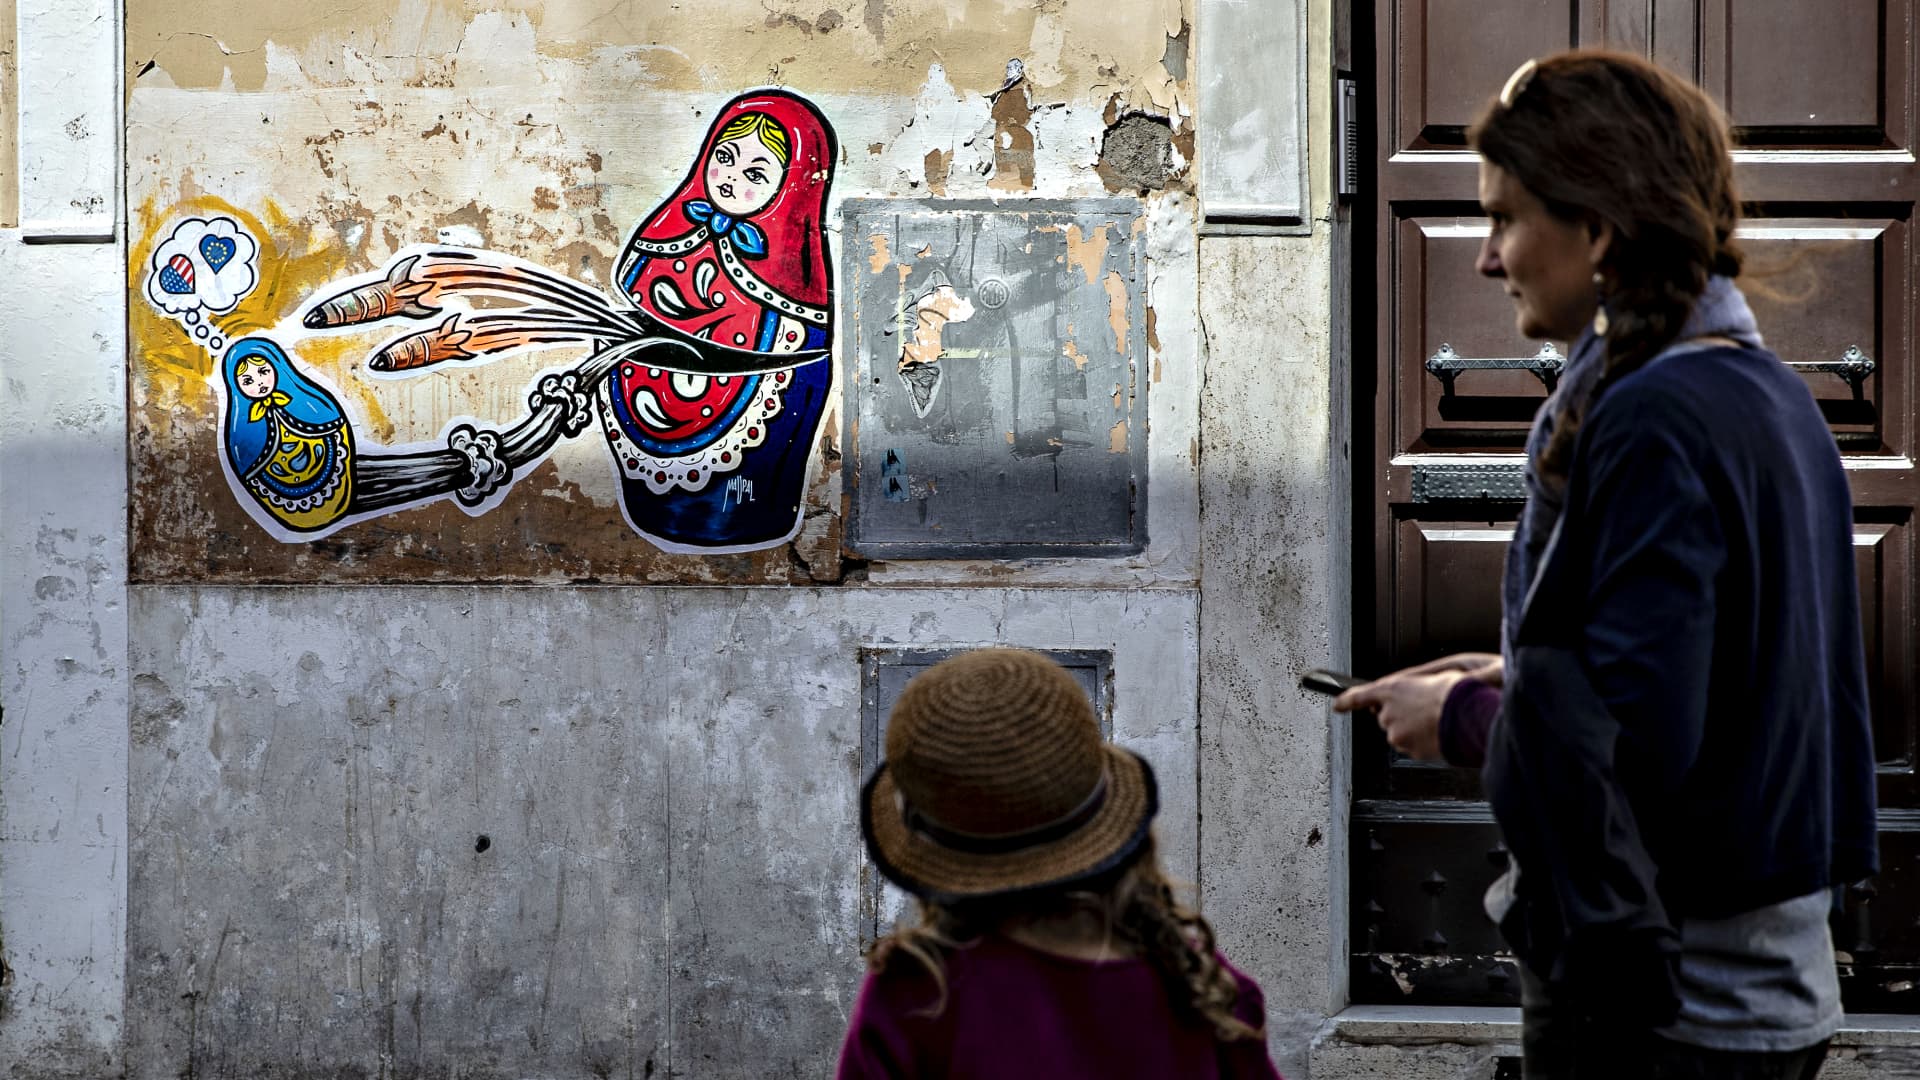 Rome, the new mural by the artist Maupal against the invasion of Ukraine by Russia depicting two Matryoshkas. 